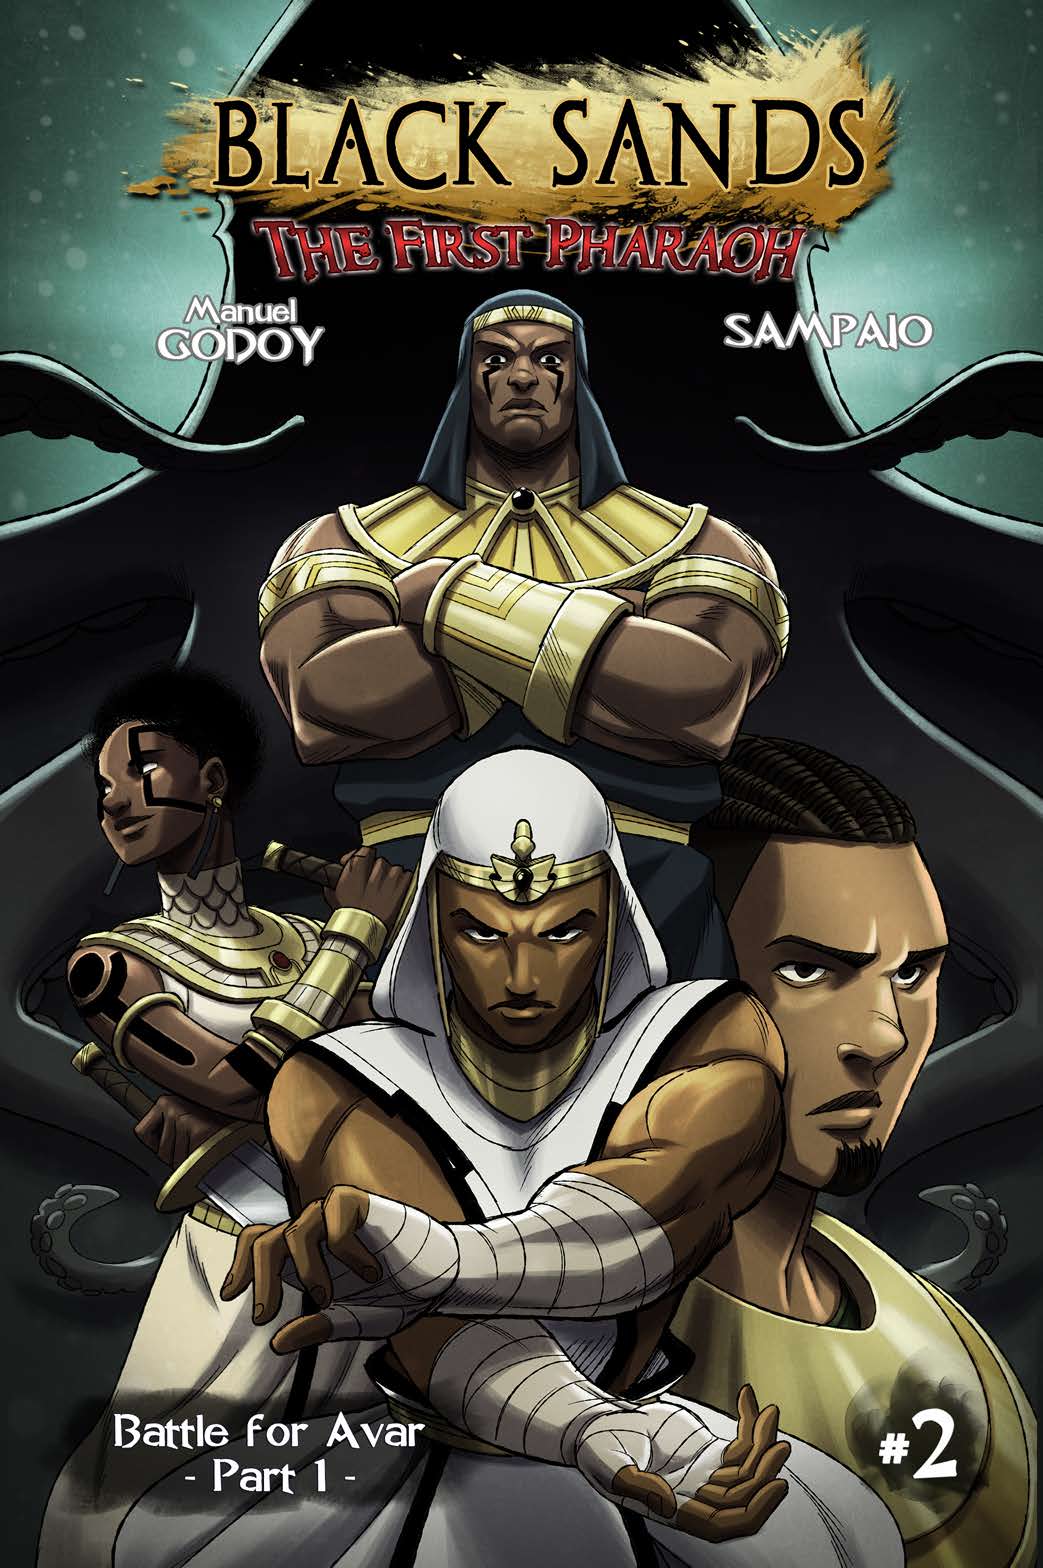 Black Sands, the First Pharaoh #2